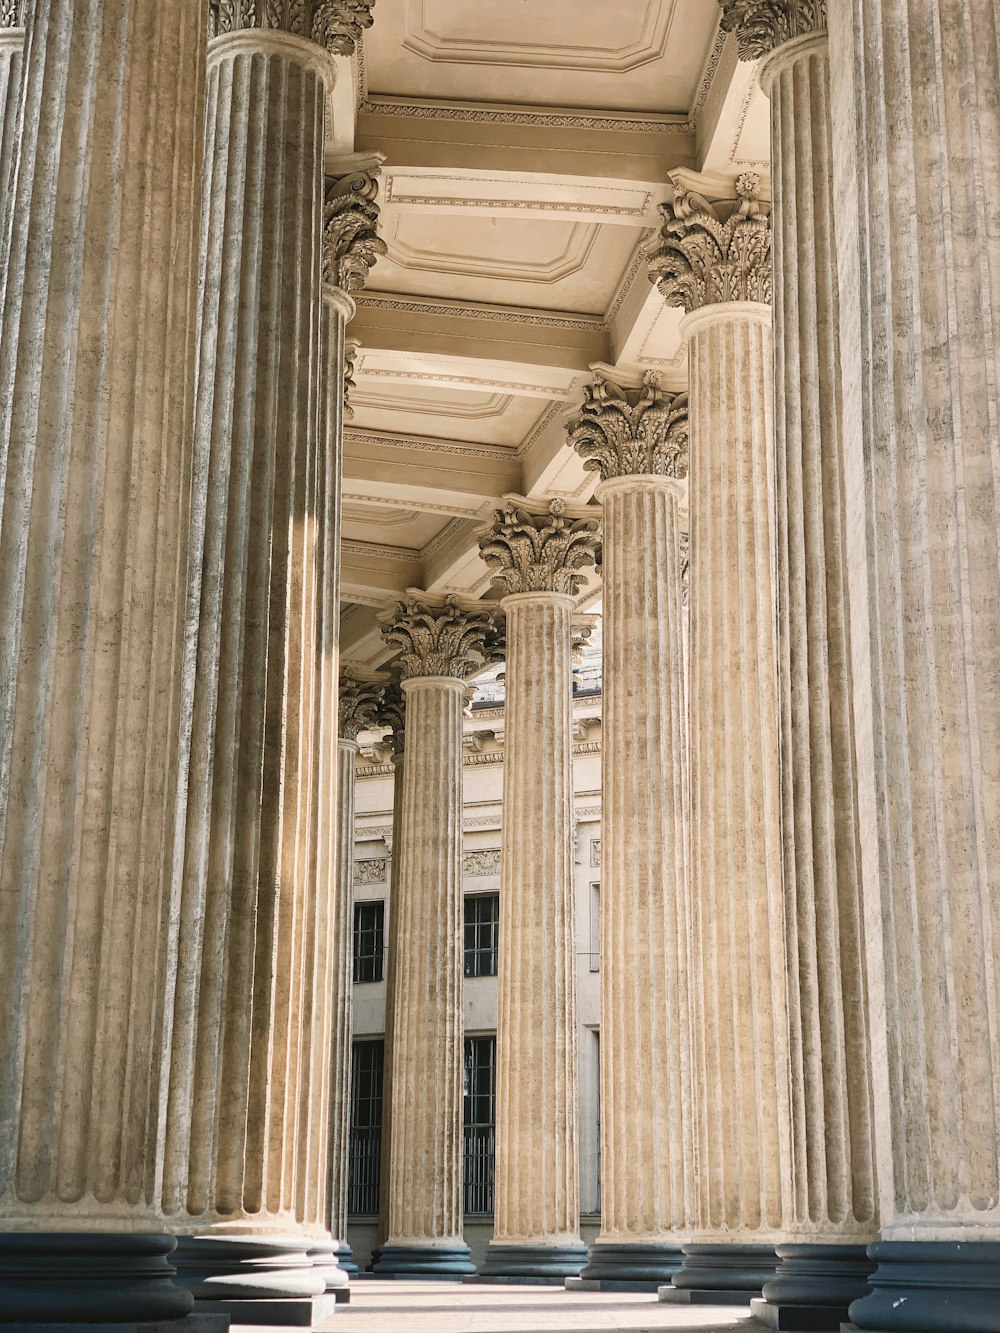 the columns of a building are lined with columns